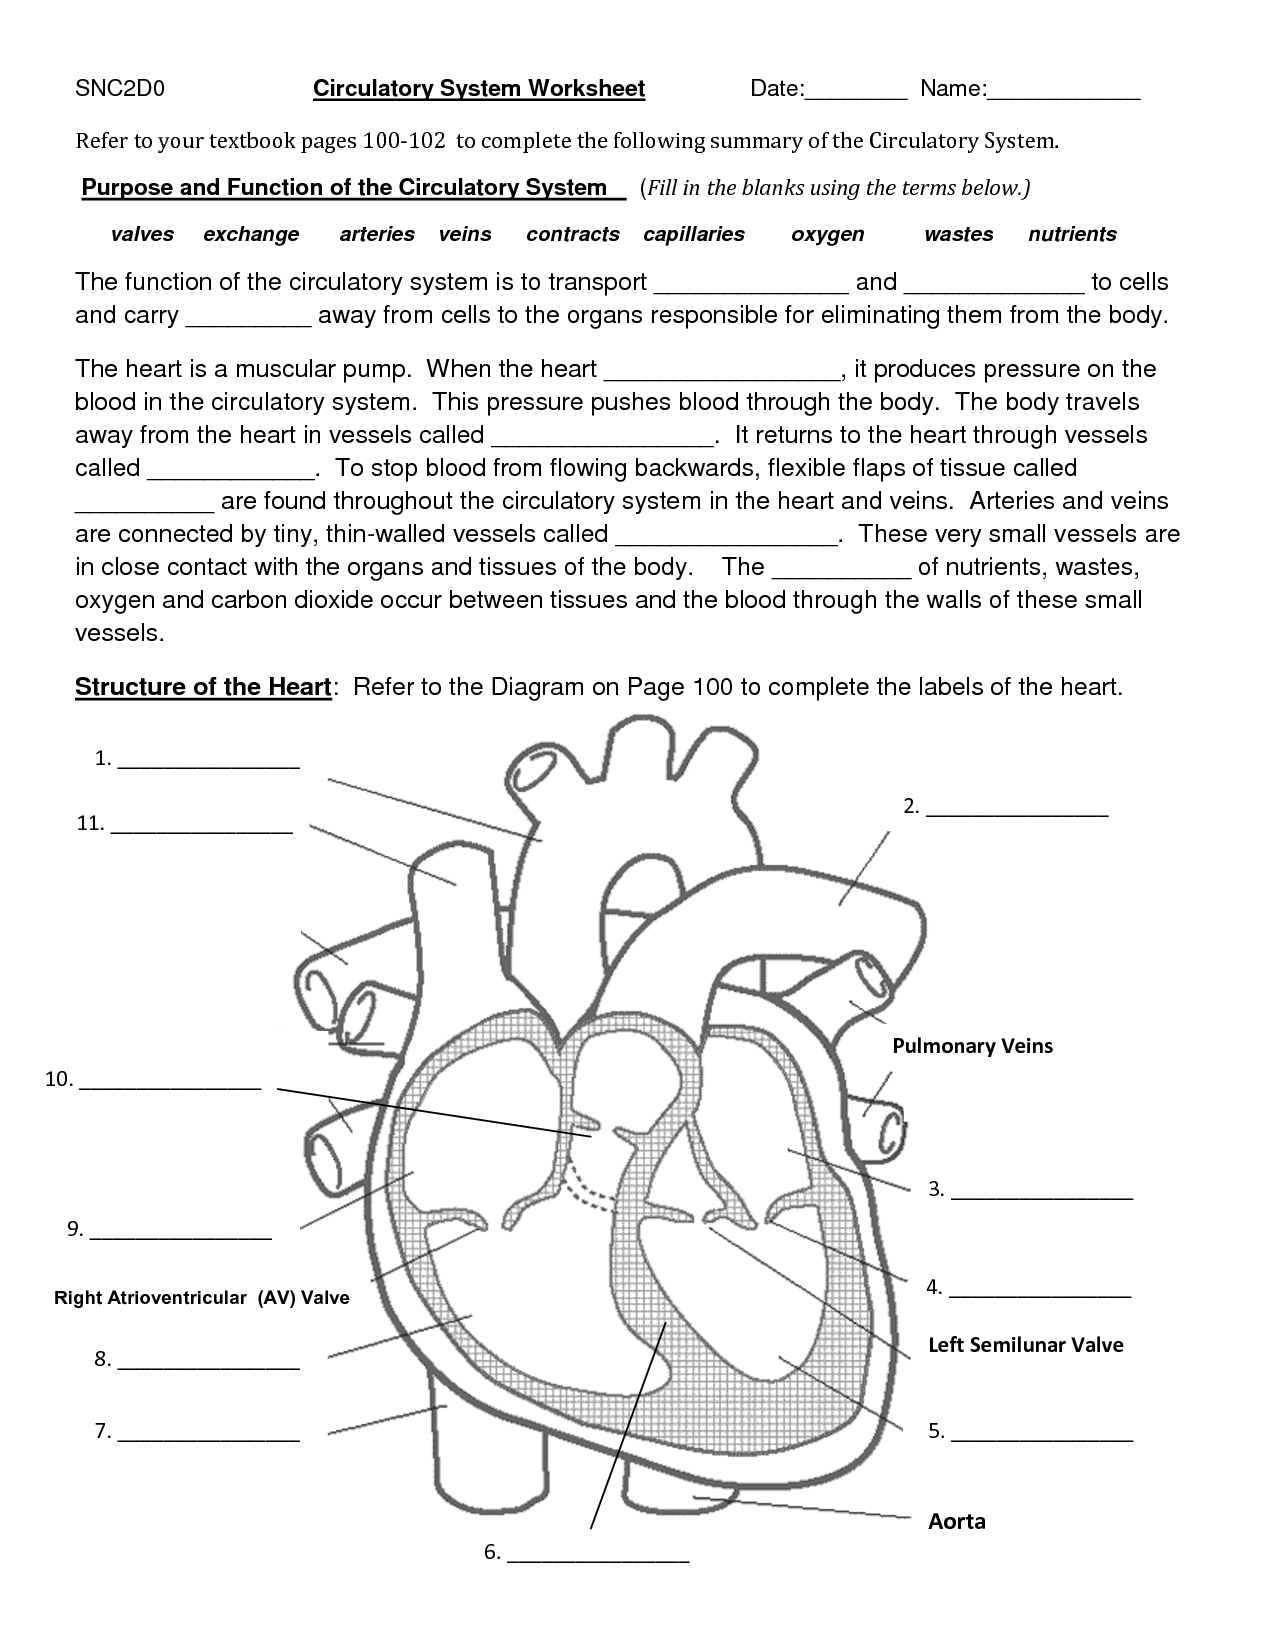 18-best-images-of-circulatory-system-worksheets-and-answers-circulatory-system-worksheets